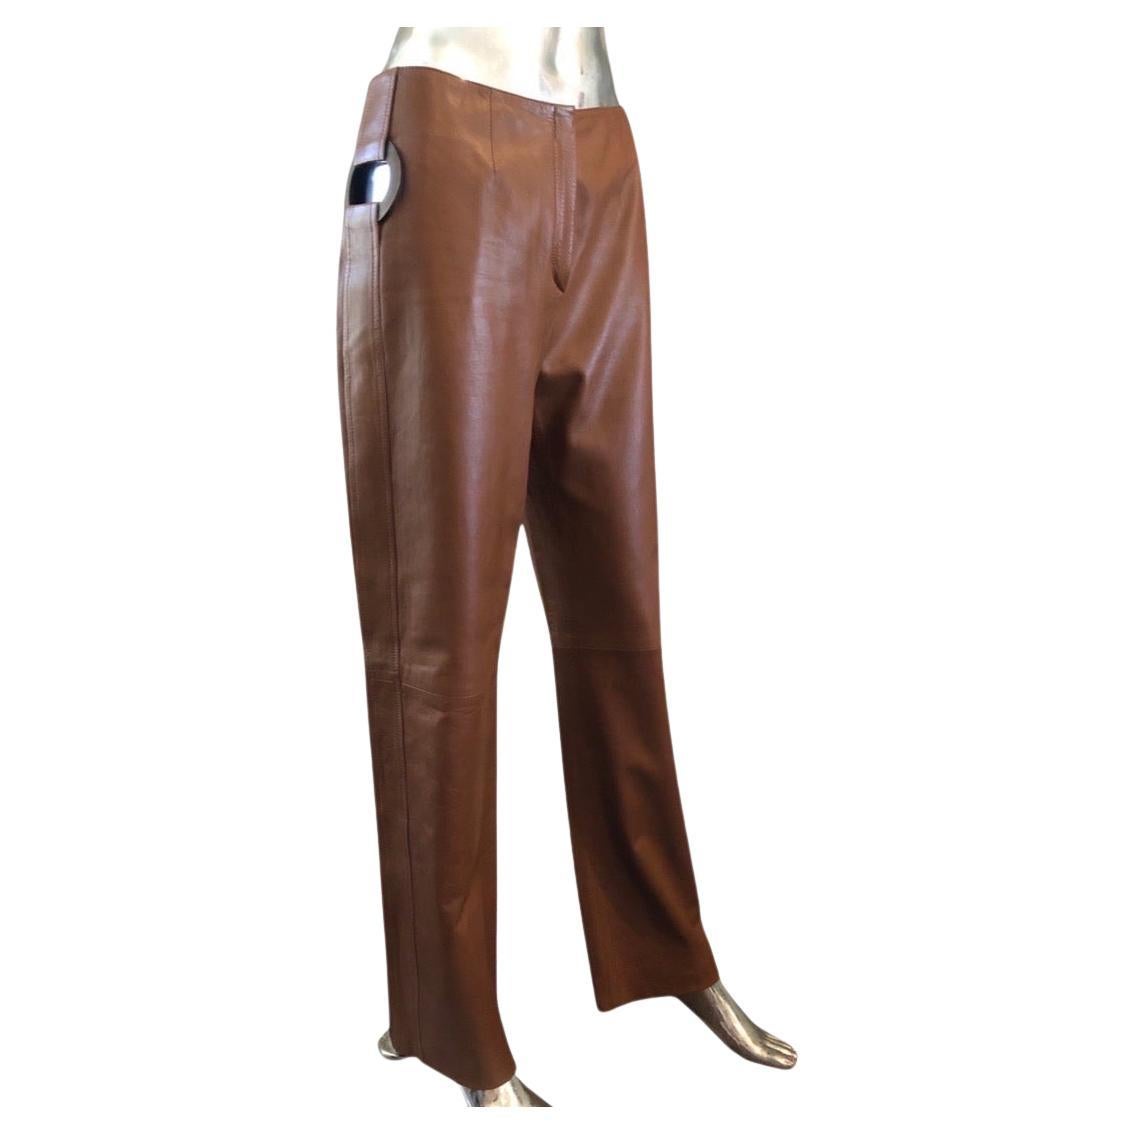 Valentino Italy Runway Collection Cognac Vintage Leather Pants with Rings Size 8 For Sale